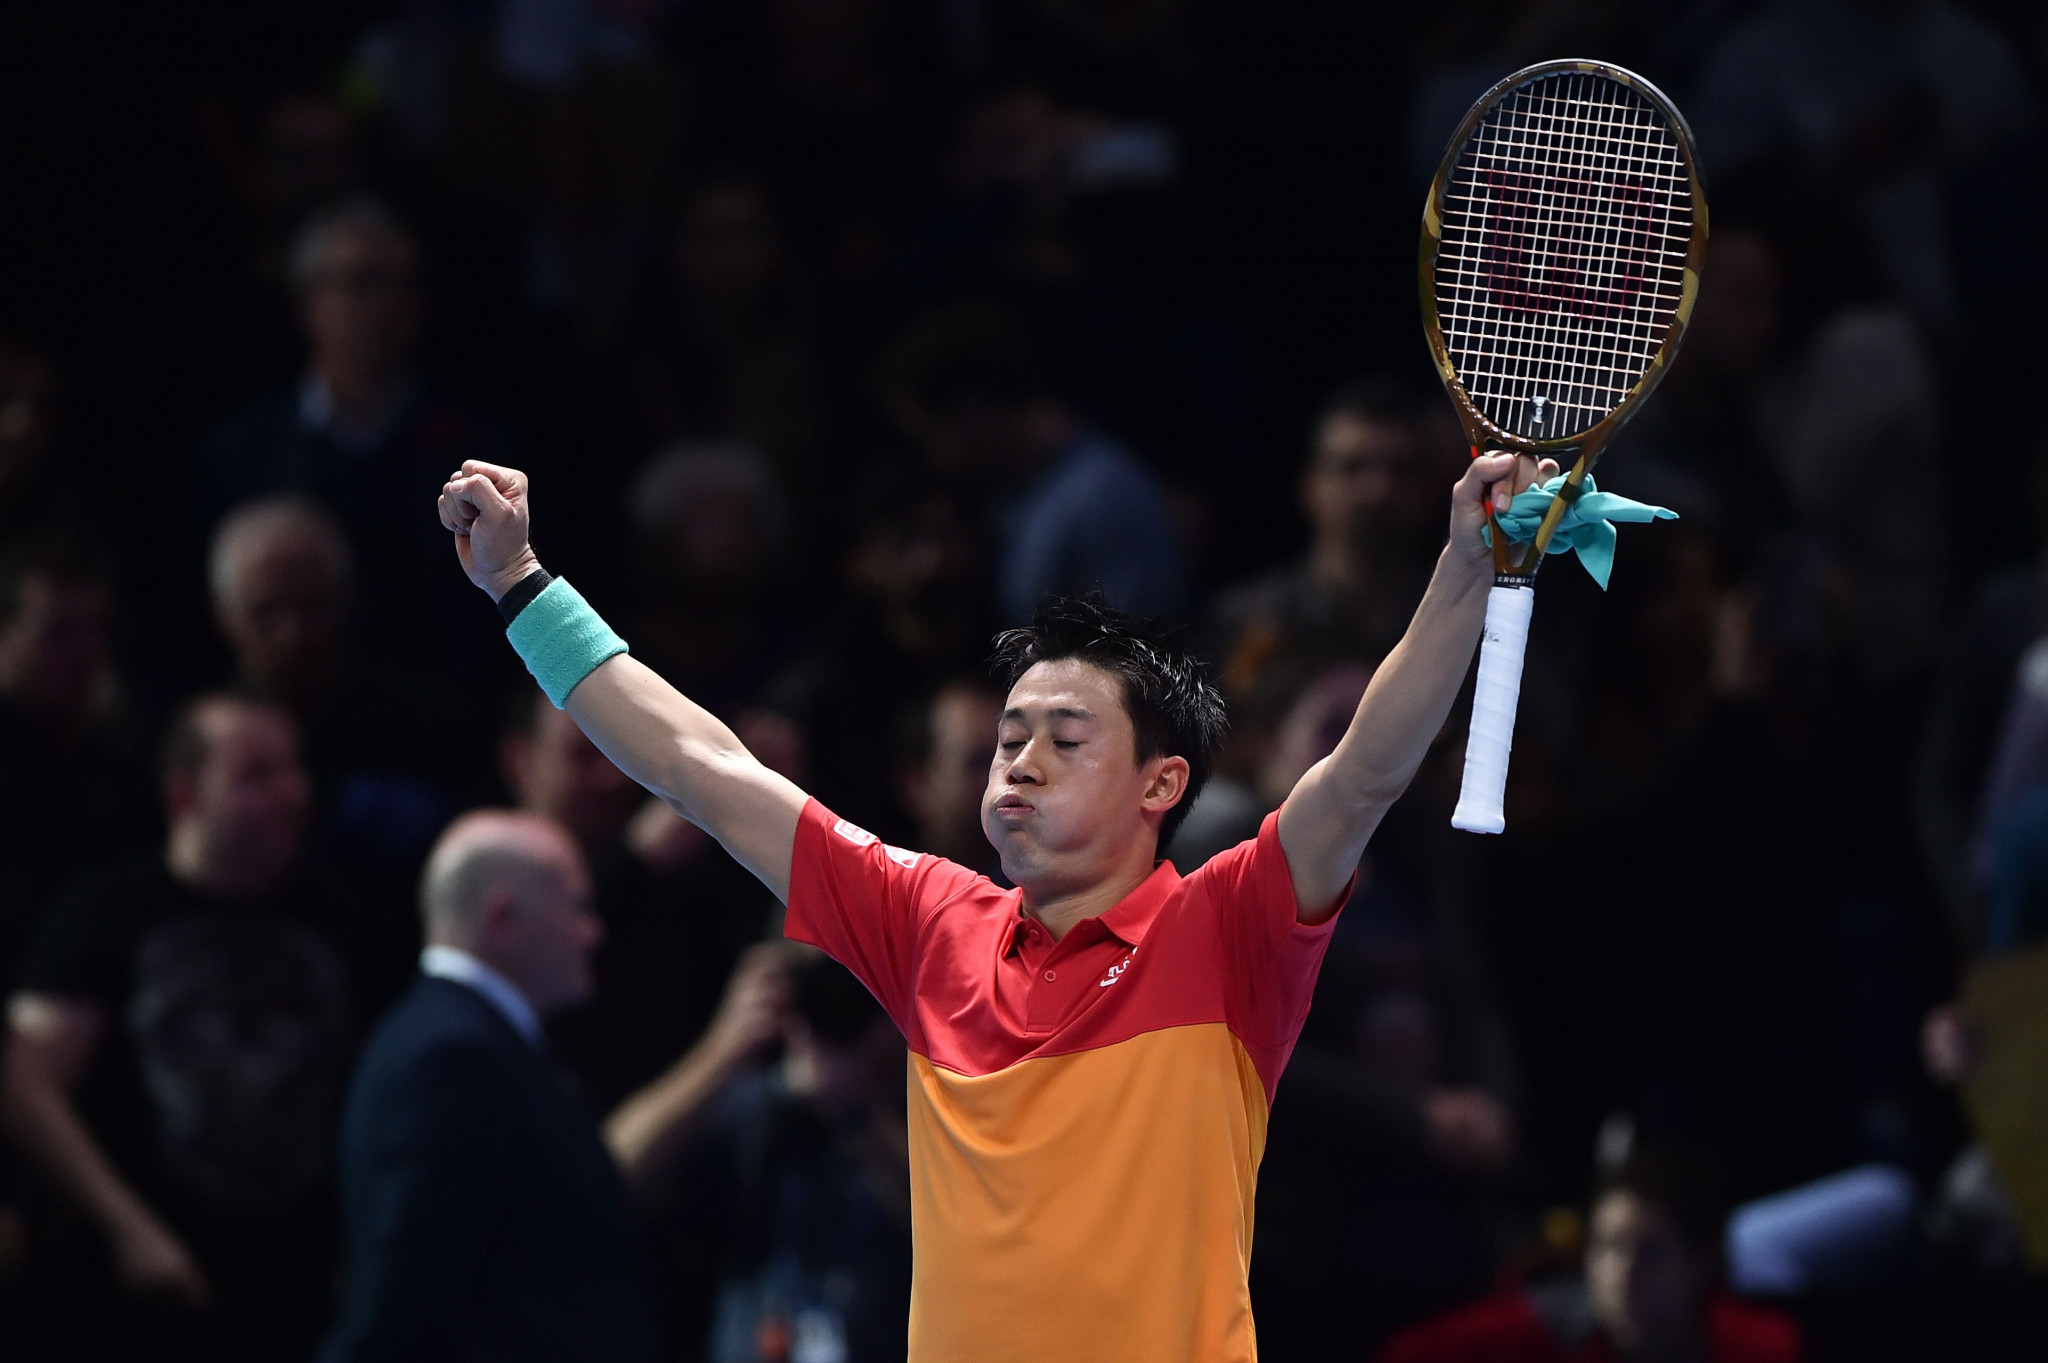 Nishikori shocks Federer in opening ATP Finals match with straight-sets win